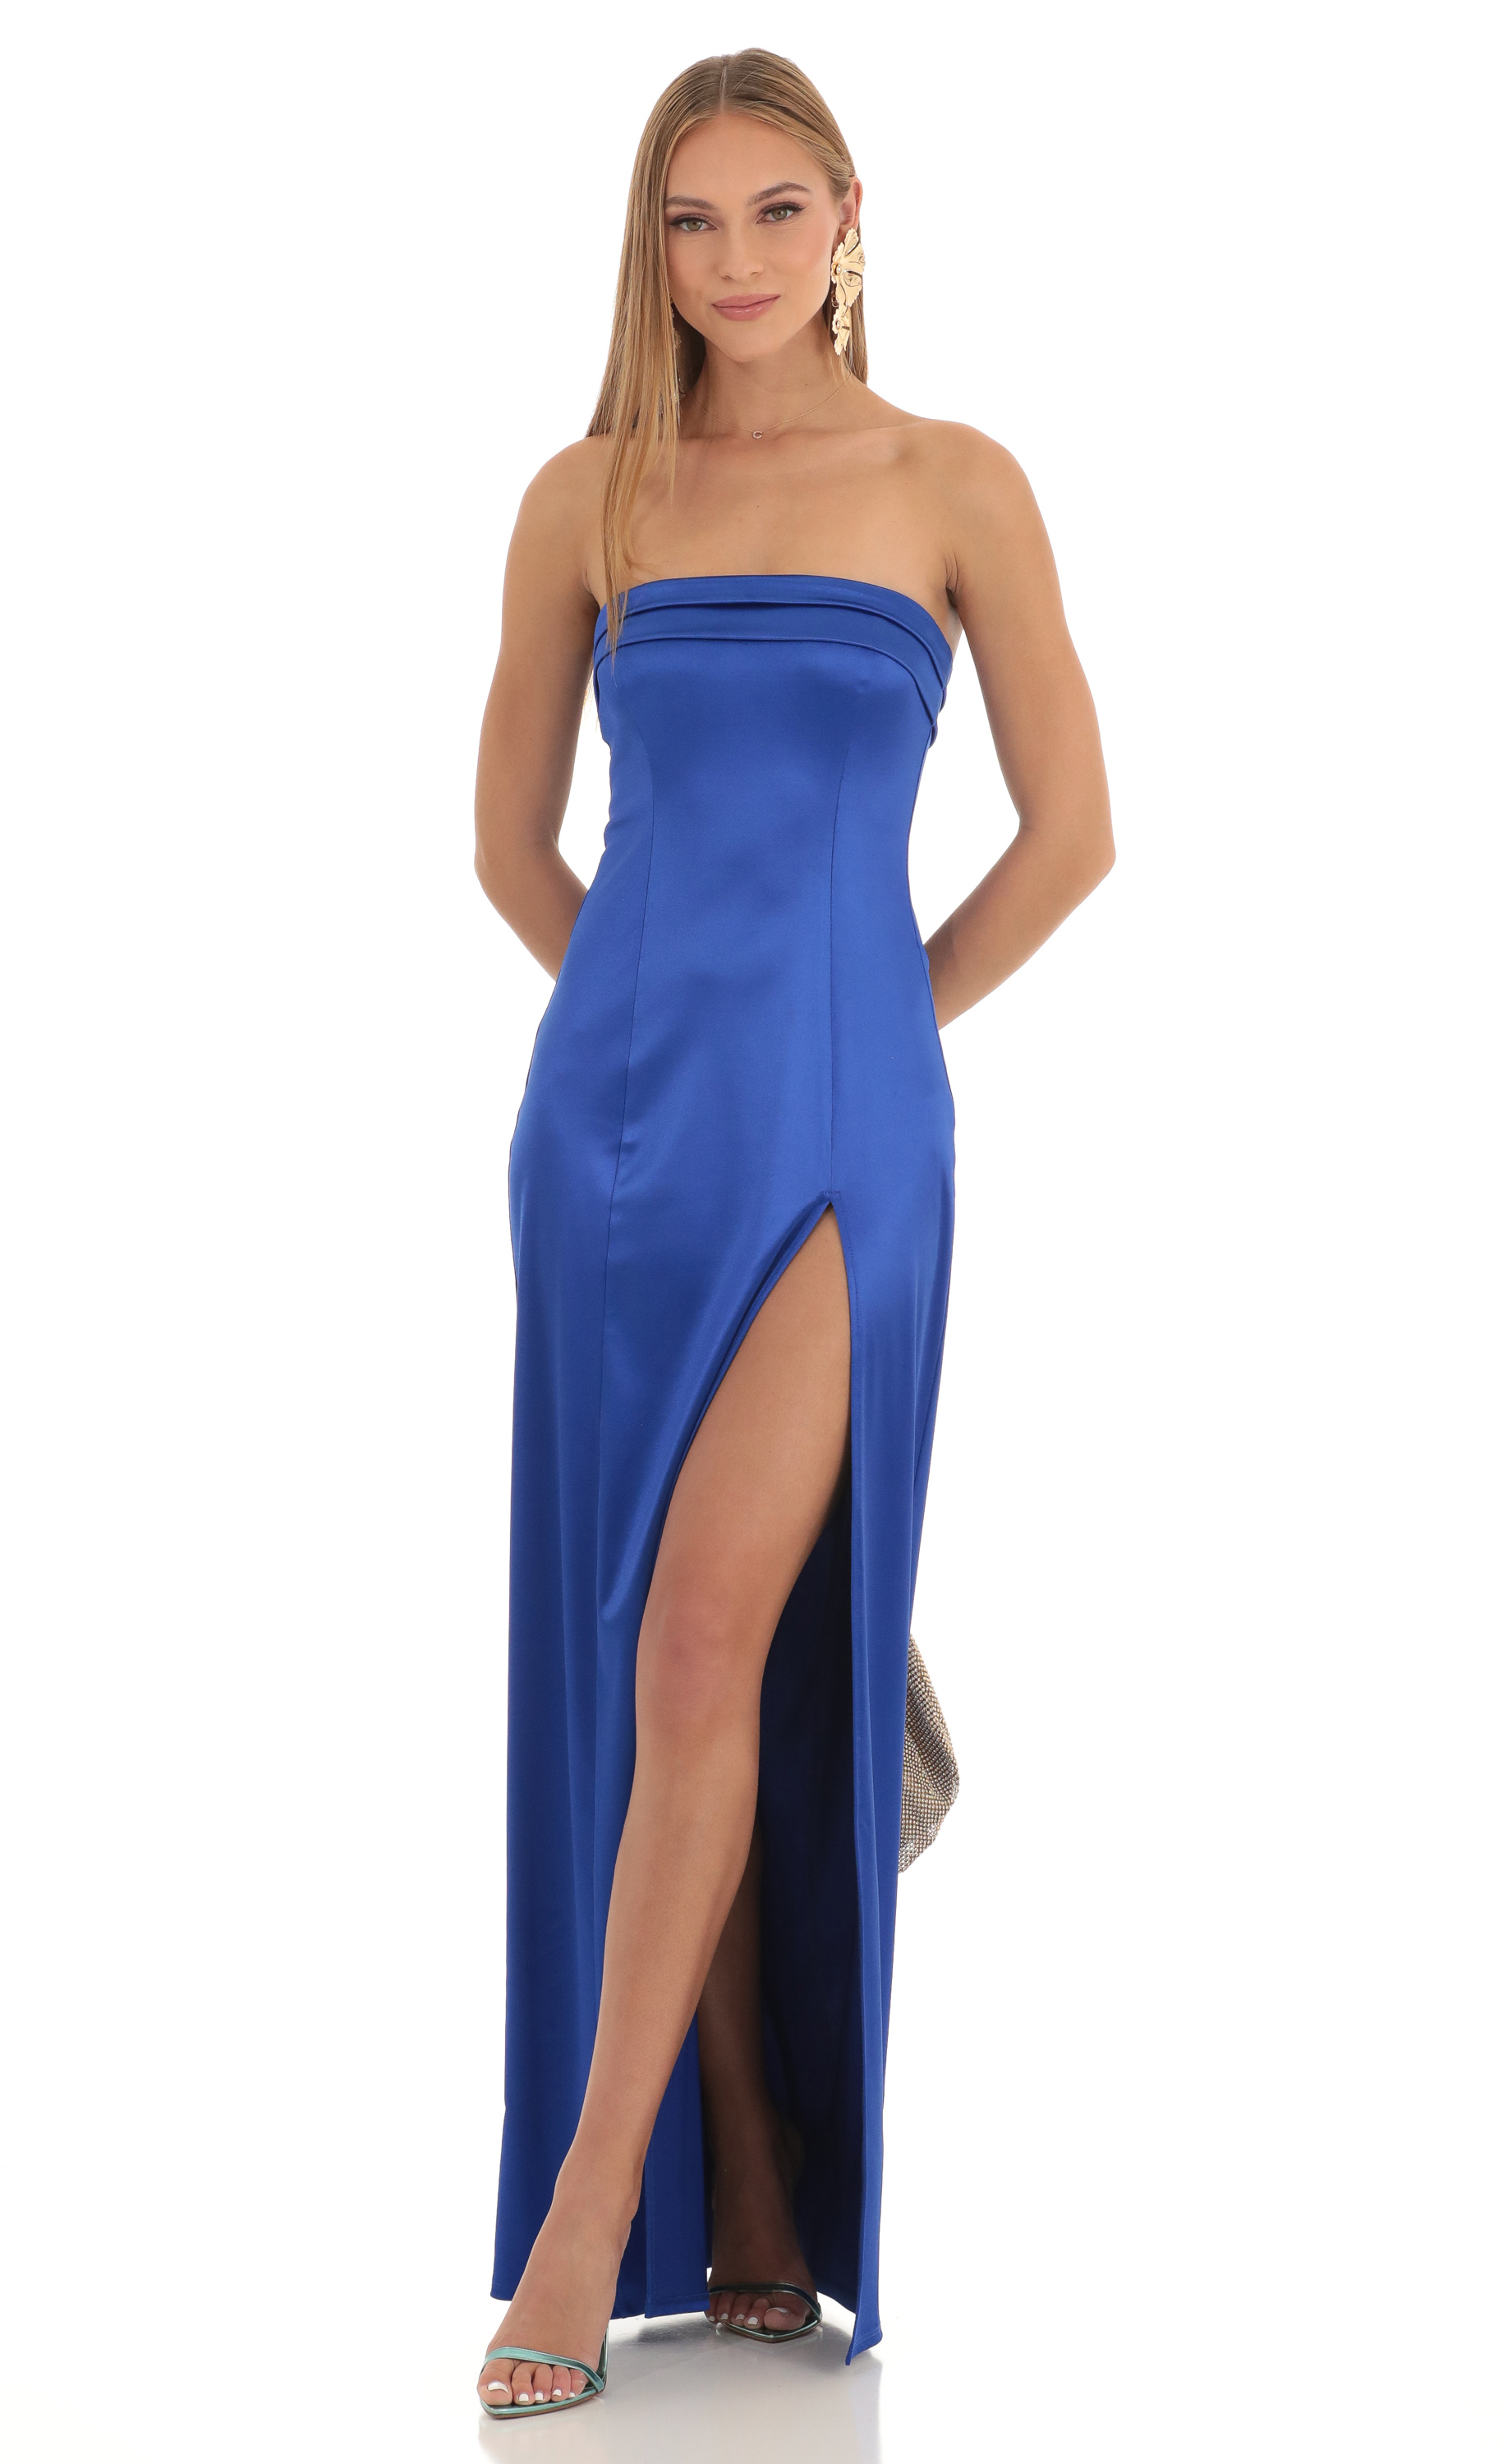 Satin Pleated Strapless Maxi Dress in Royal Blue